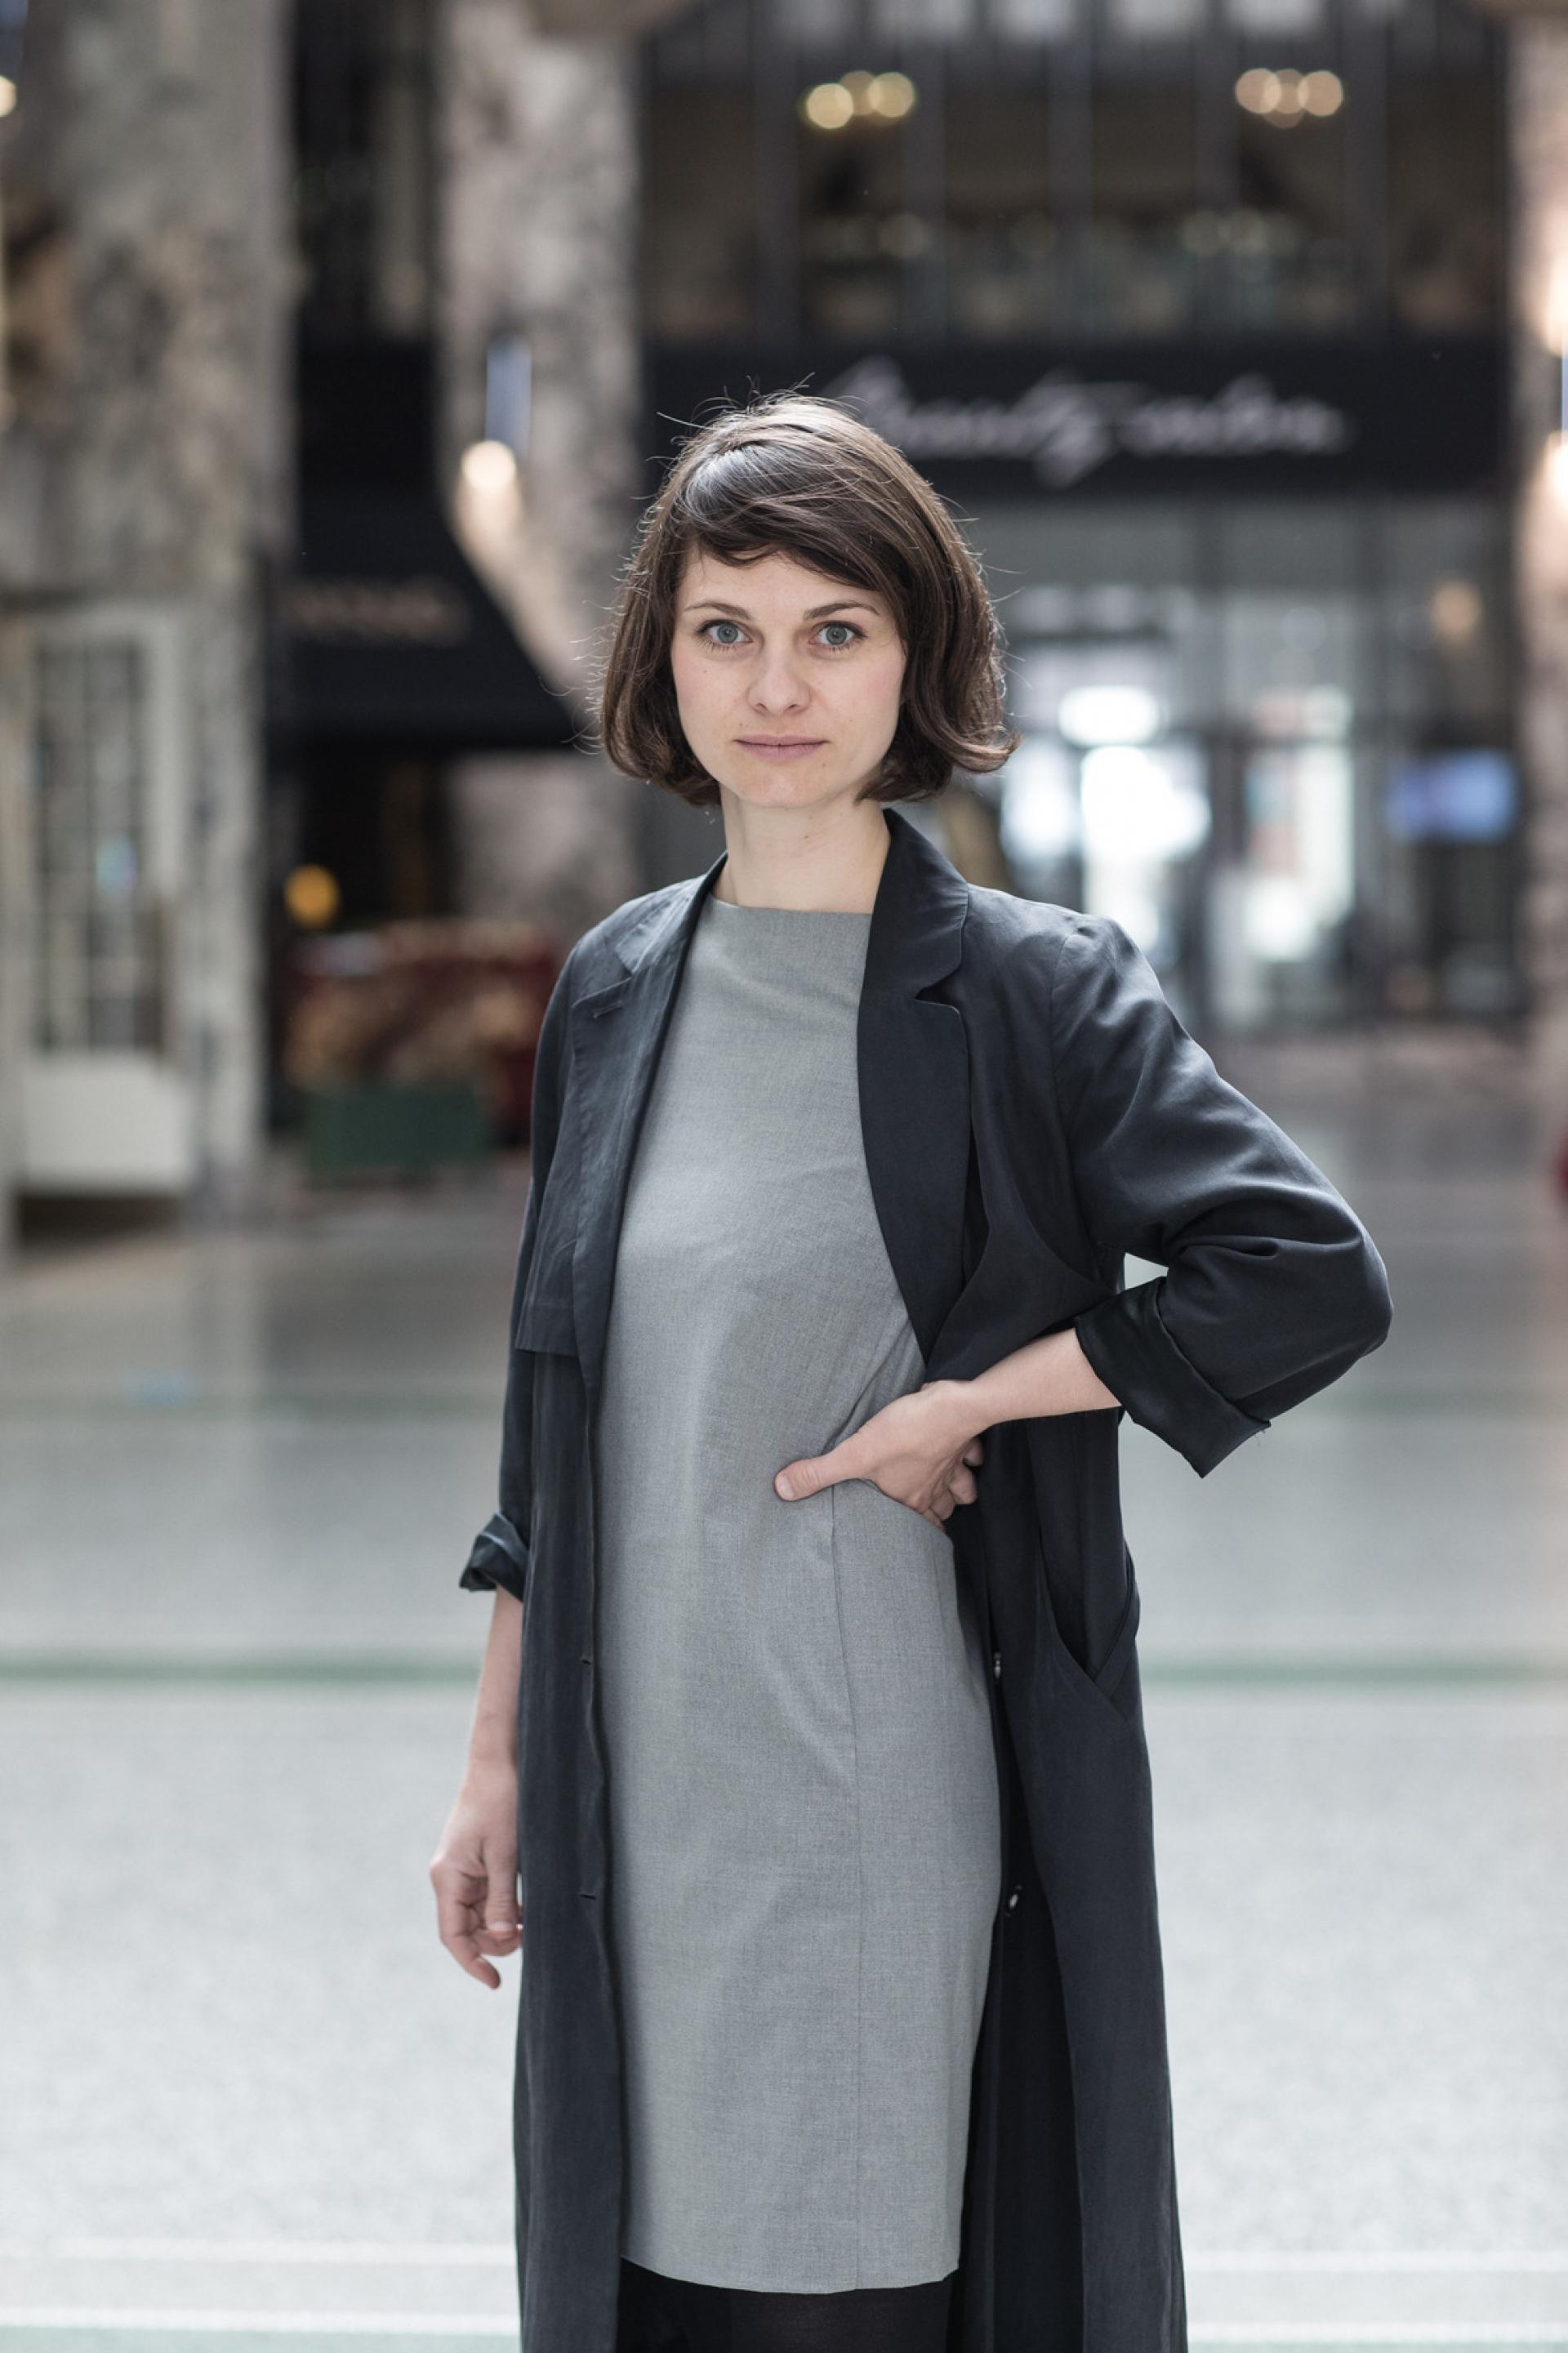 Helena Doudová is curator of the Architecture Collection of the National Gallery Prague. She gained curatorial and museum experience as research and curatorial fellow of the International Museum Program in the German Museum of Books and Writing in Leipzig in collaboration with the University of Erfurt and the German Federal Cultural Foundation 2016/2017, as a Robert Bosch Fellow at Architecture Museum of the TU Munich – Pinakothek der Moderne (2011–2012) and as an intern in the German Architecture Centre DAZ in Berlin (2013–2014). She initiated and curated NO DEMOLITIONS! Forms of Brutalism in Prague, Baugruppe ist super!, Image Factories: Infographics 1920-1945: Fritz Kahn, Otto Neurath. She is a PhD candidate at the Institute of Art History of the University of Zurich. She was awarded DAAD research scholarship and Aktion Österreich scholarship. | Photo © Jan Faukner